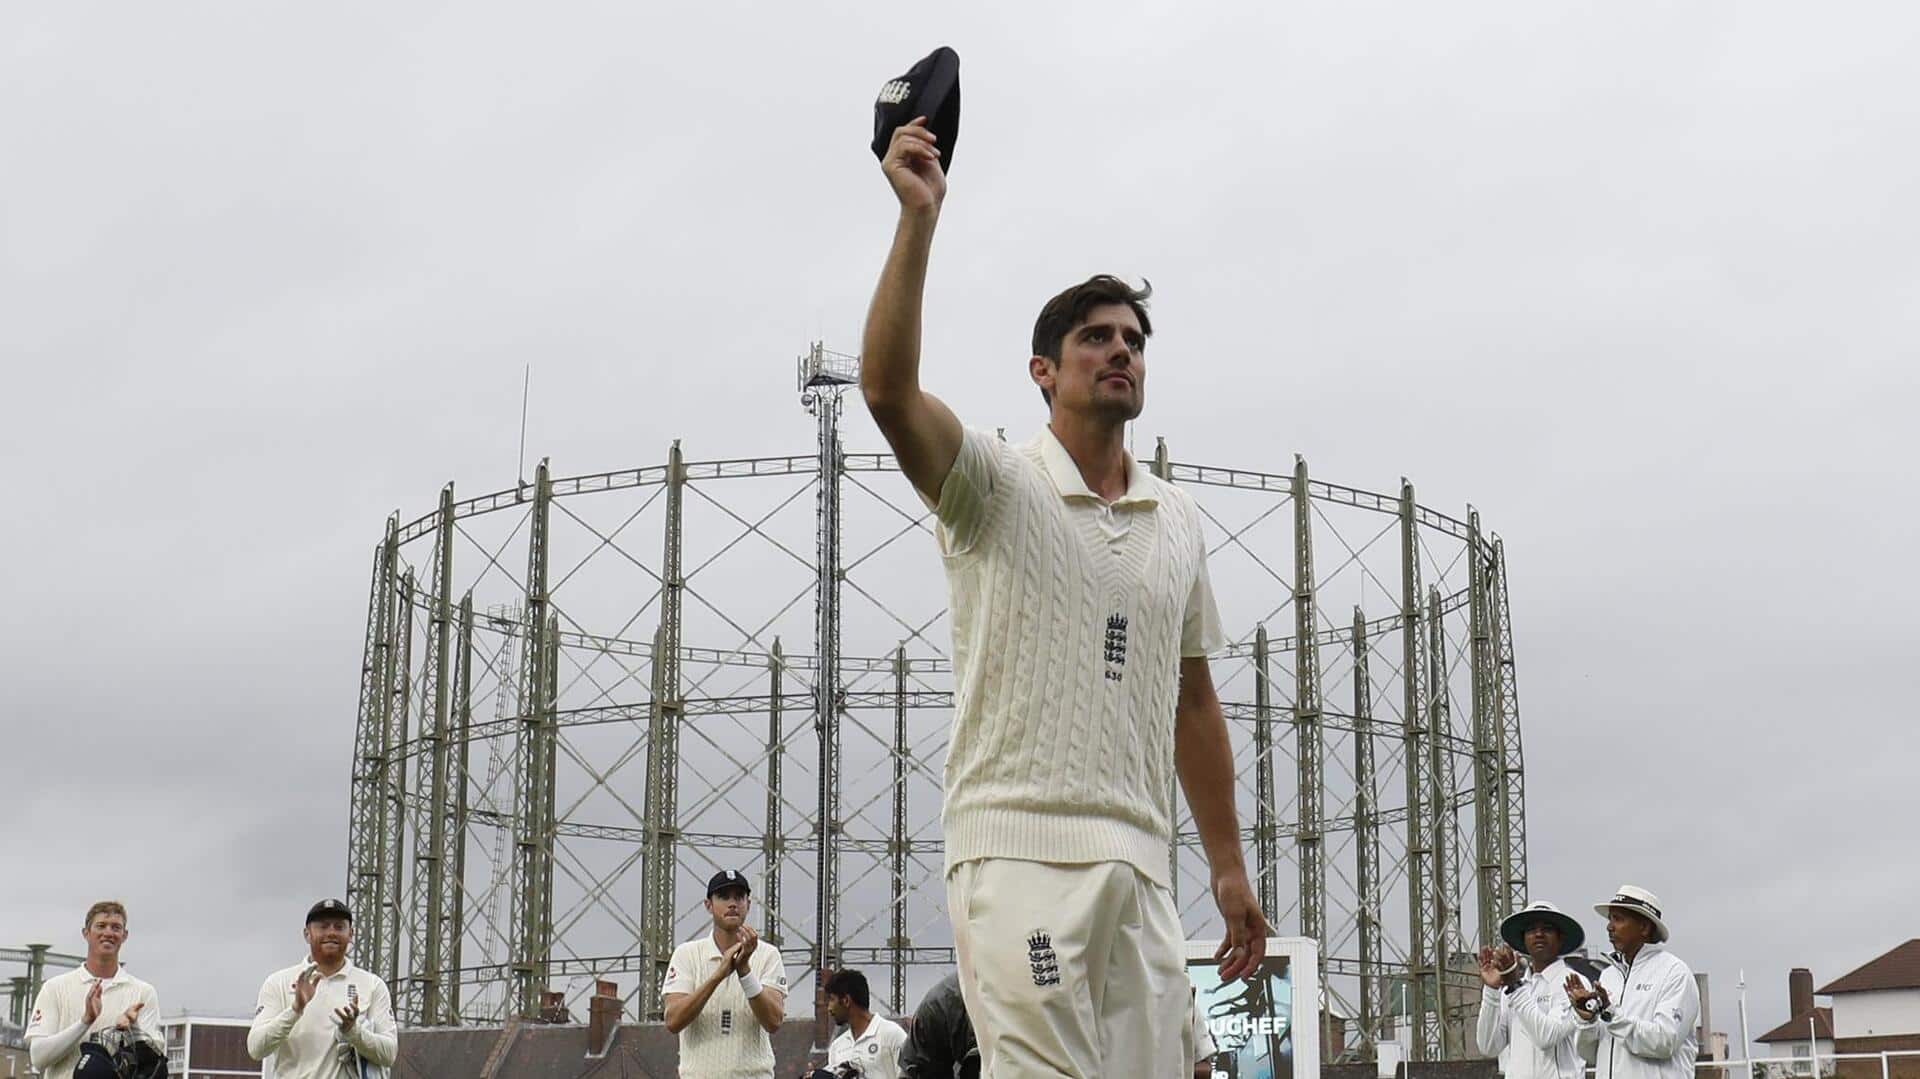 Alastair Cook retires from professional cricket: Decoding his career stats